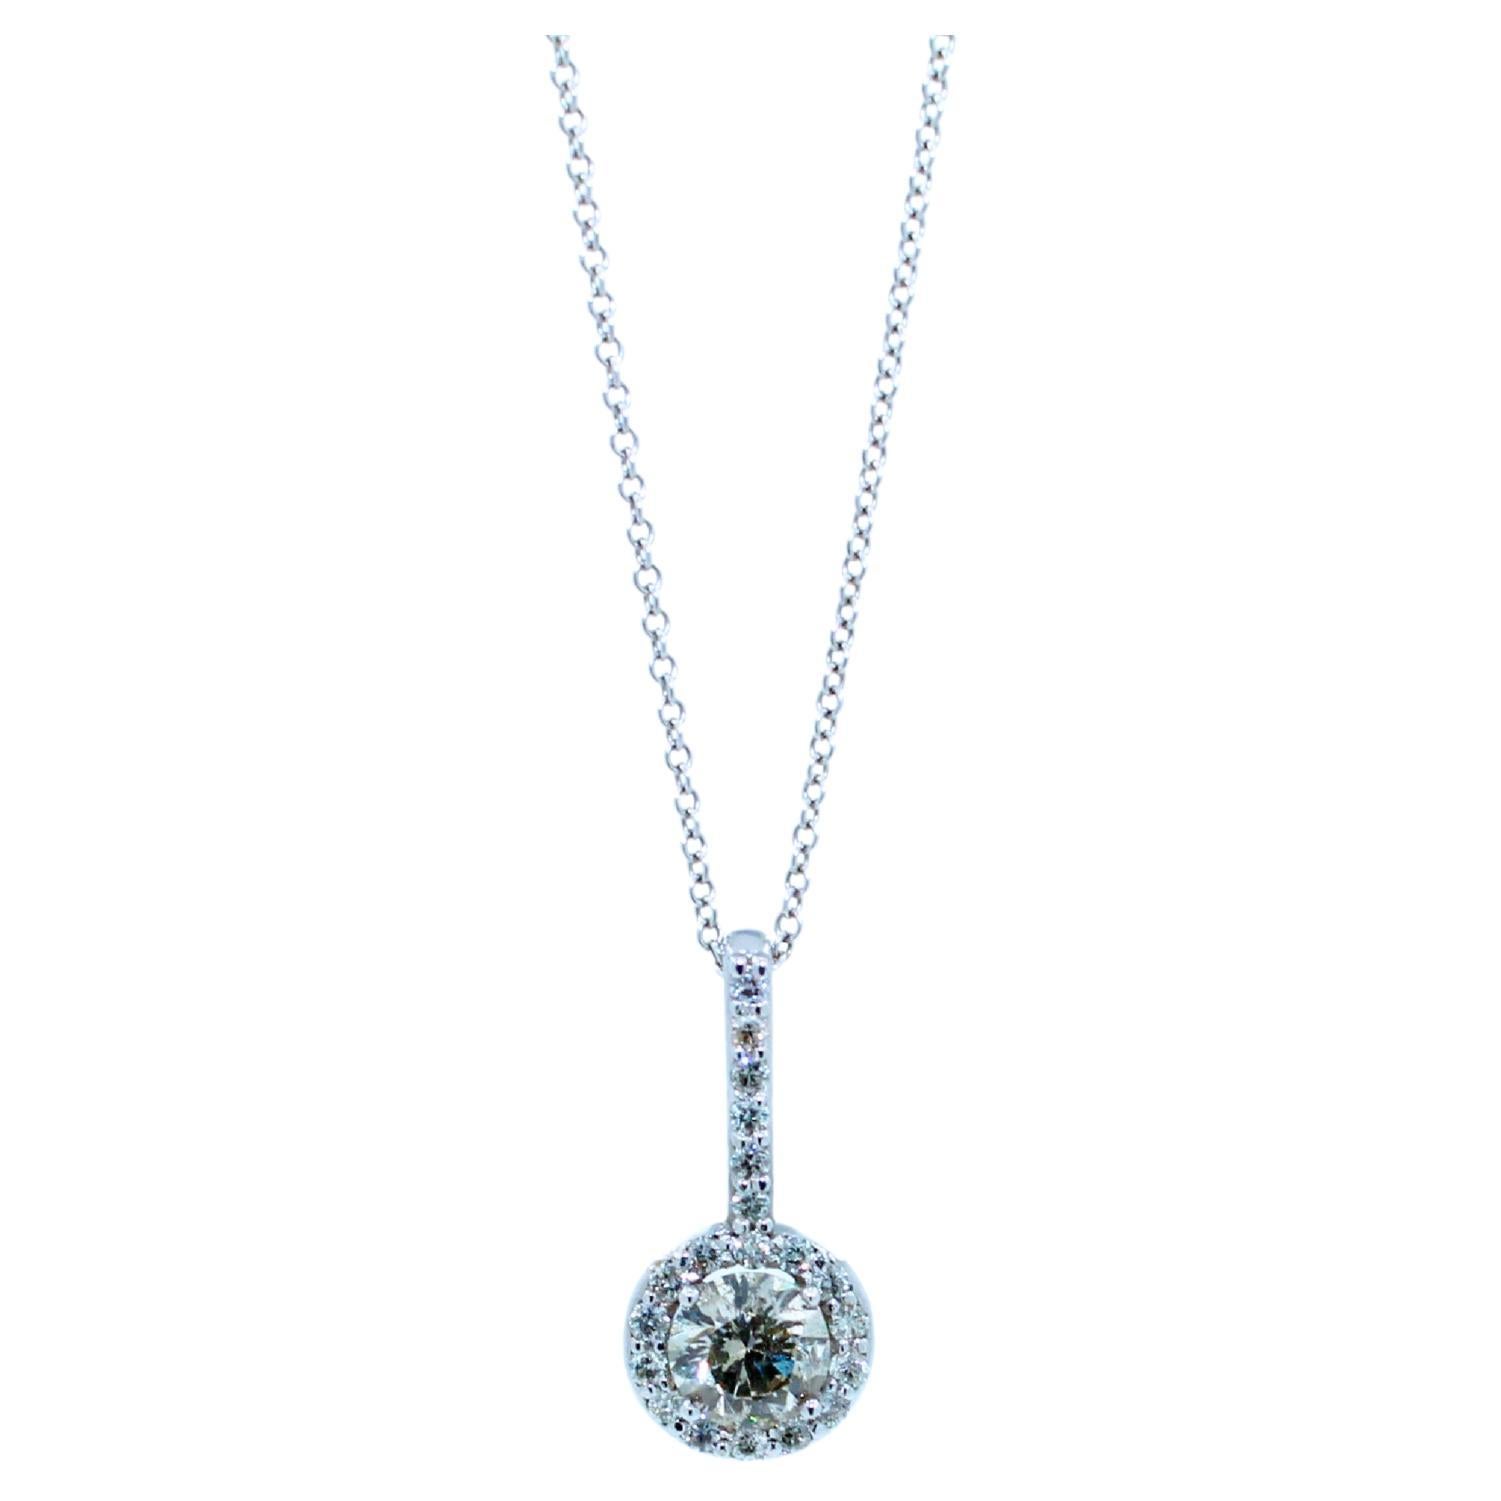 14 Karat White Gold
0.30 cts center Diamond I Color with warm, silvery tone 
0.10 cts Halo pave Diamonds
18 inches dainty cable chain